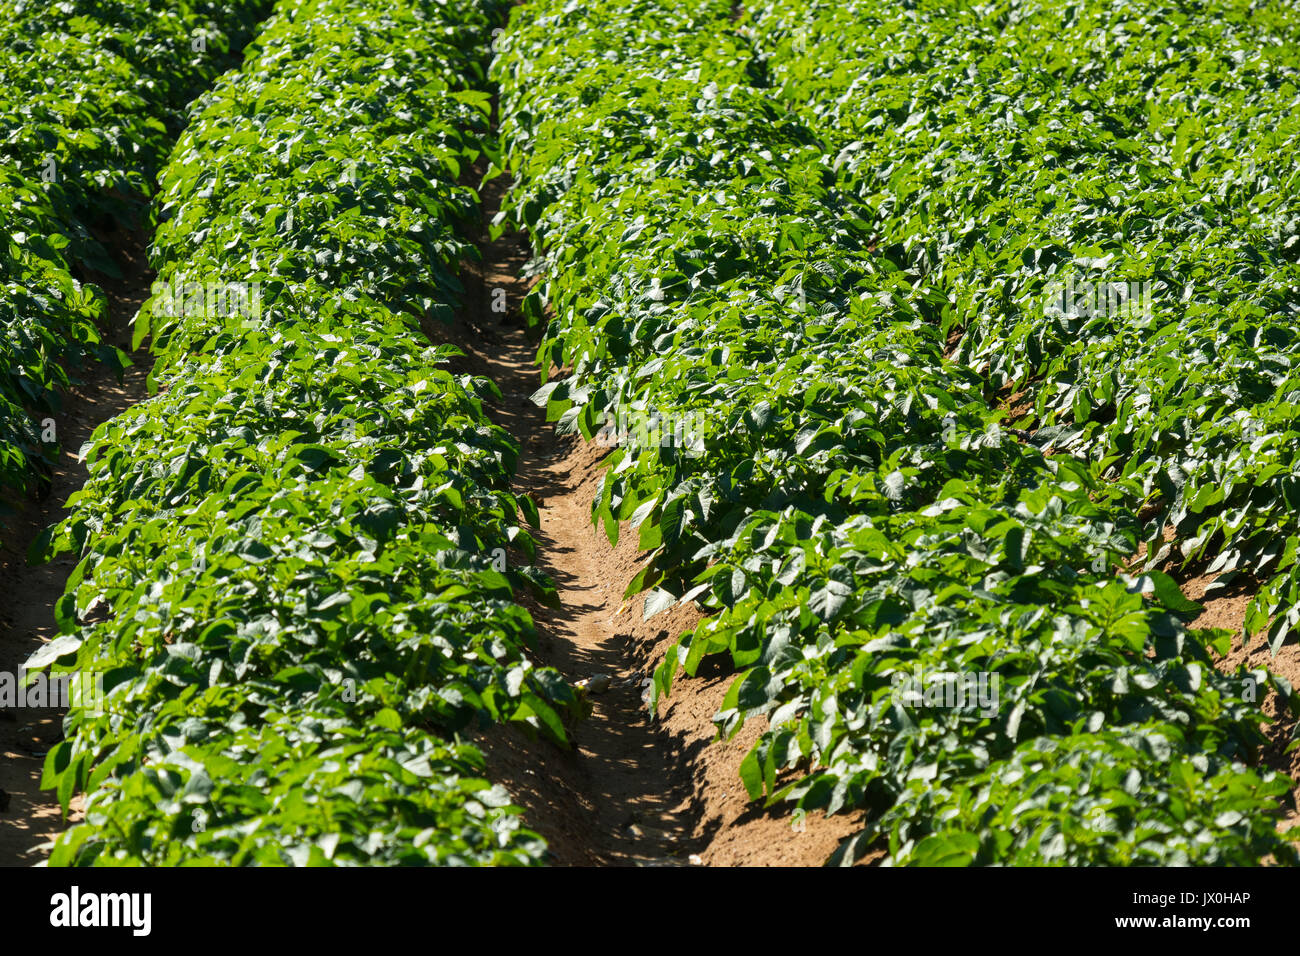 salad cultivation Stock Photo